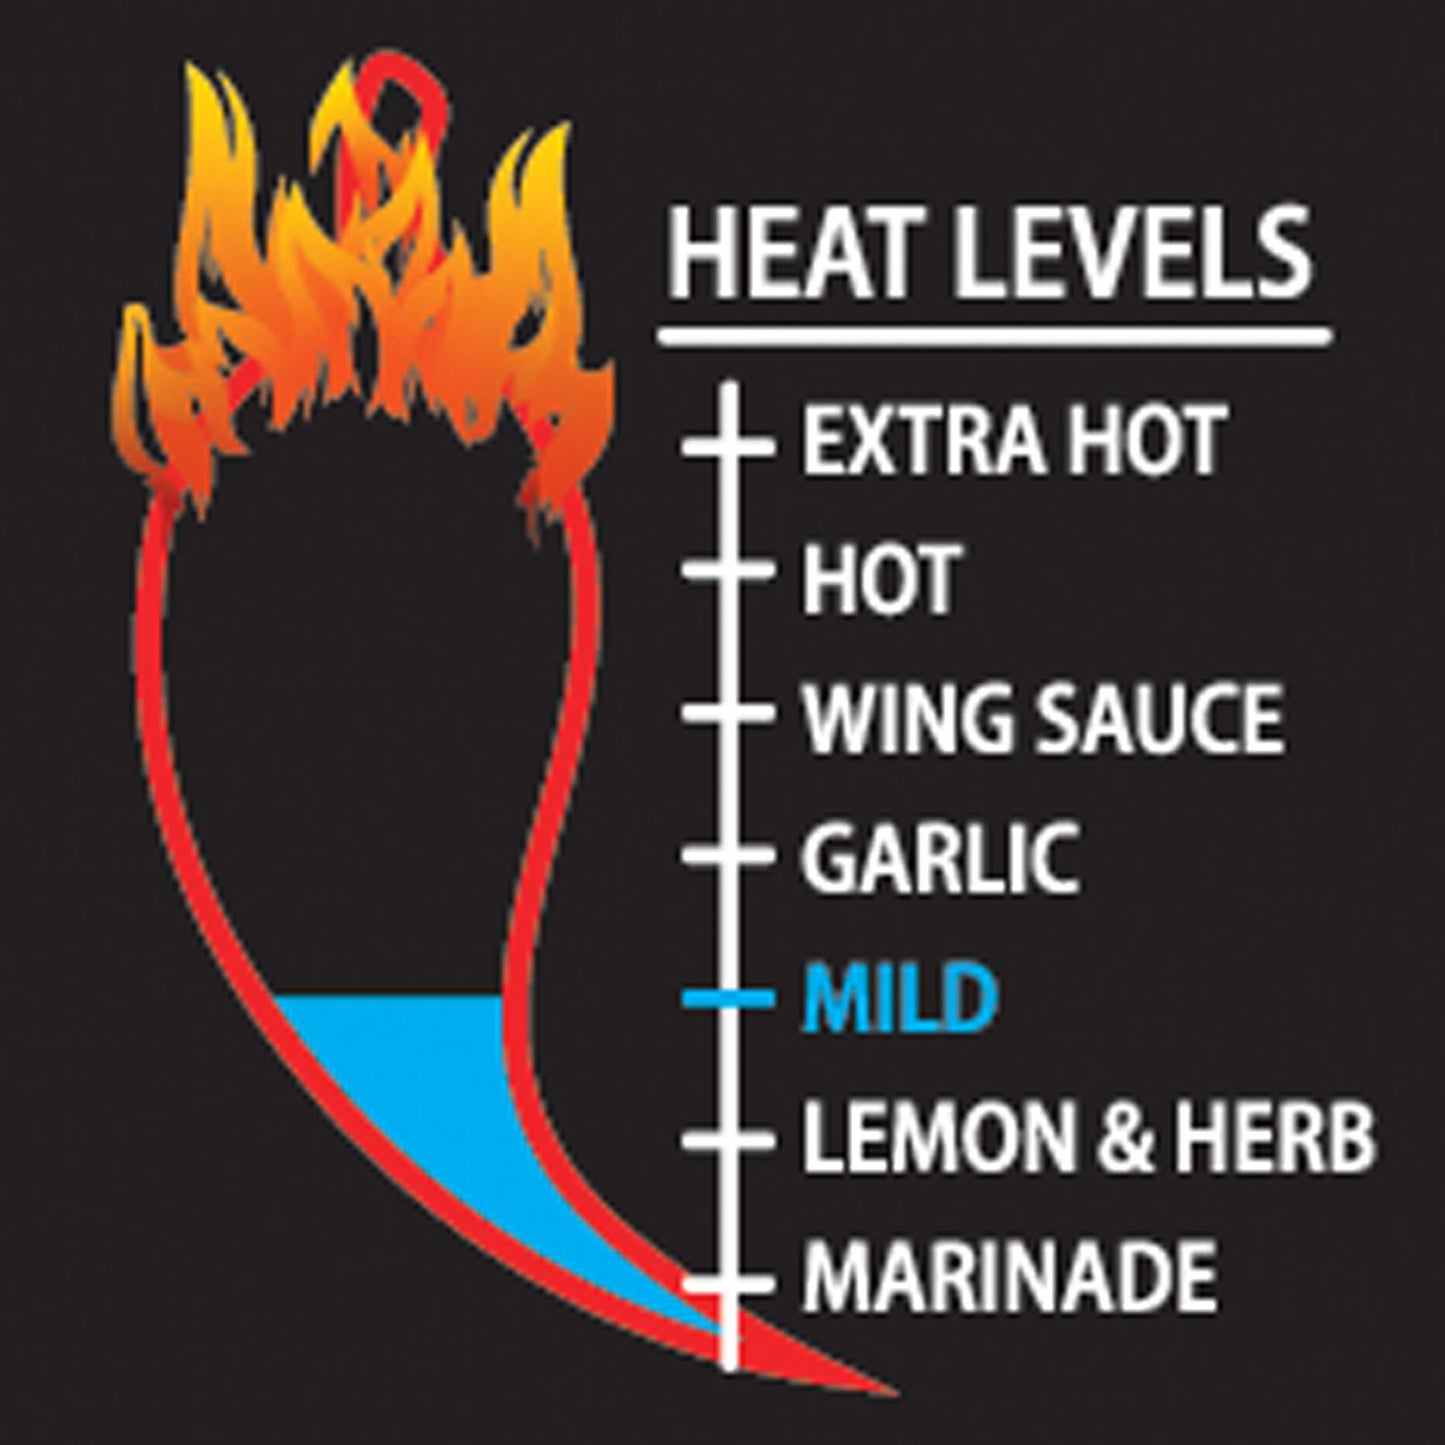 Mild Peri Peri sauce is rated 3 out of 7 on our heat scale!